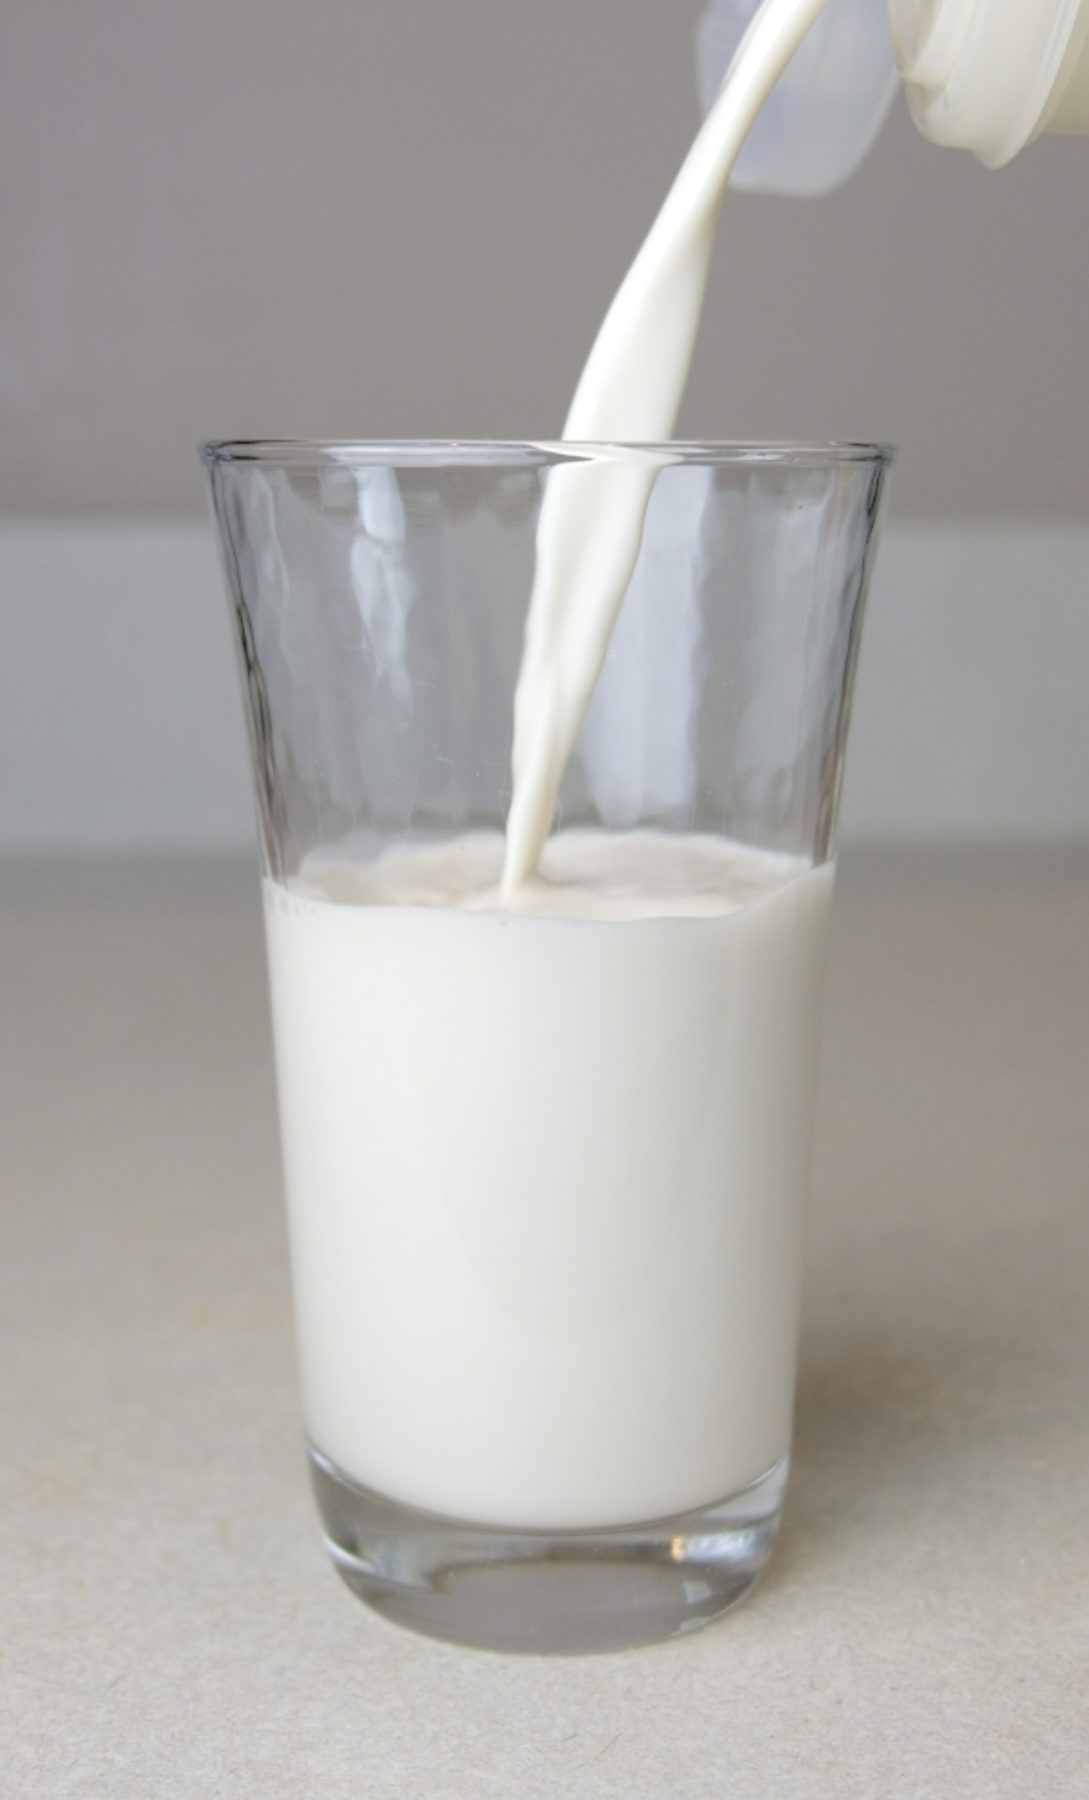 Almond milk being poured into a glass